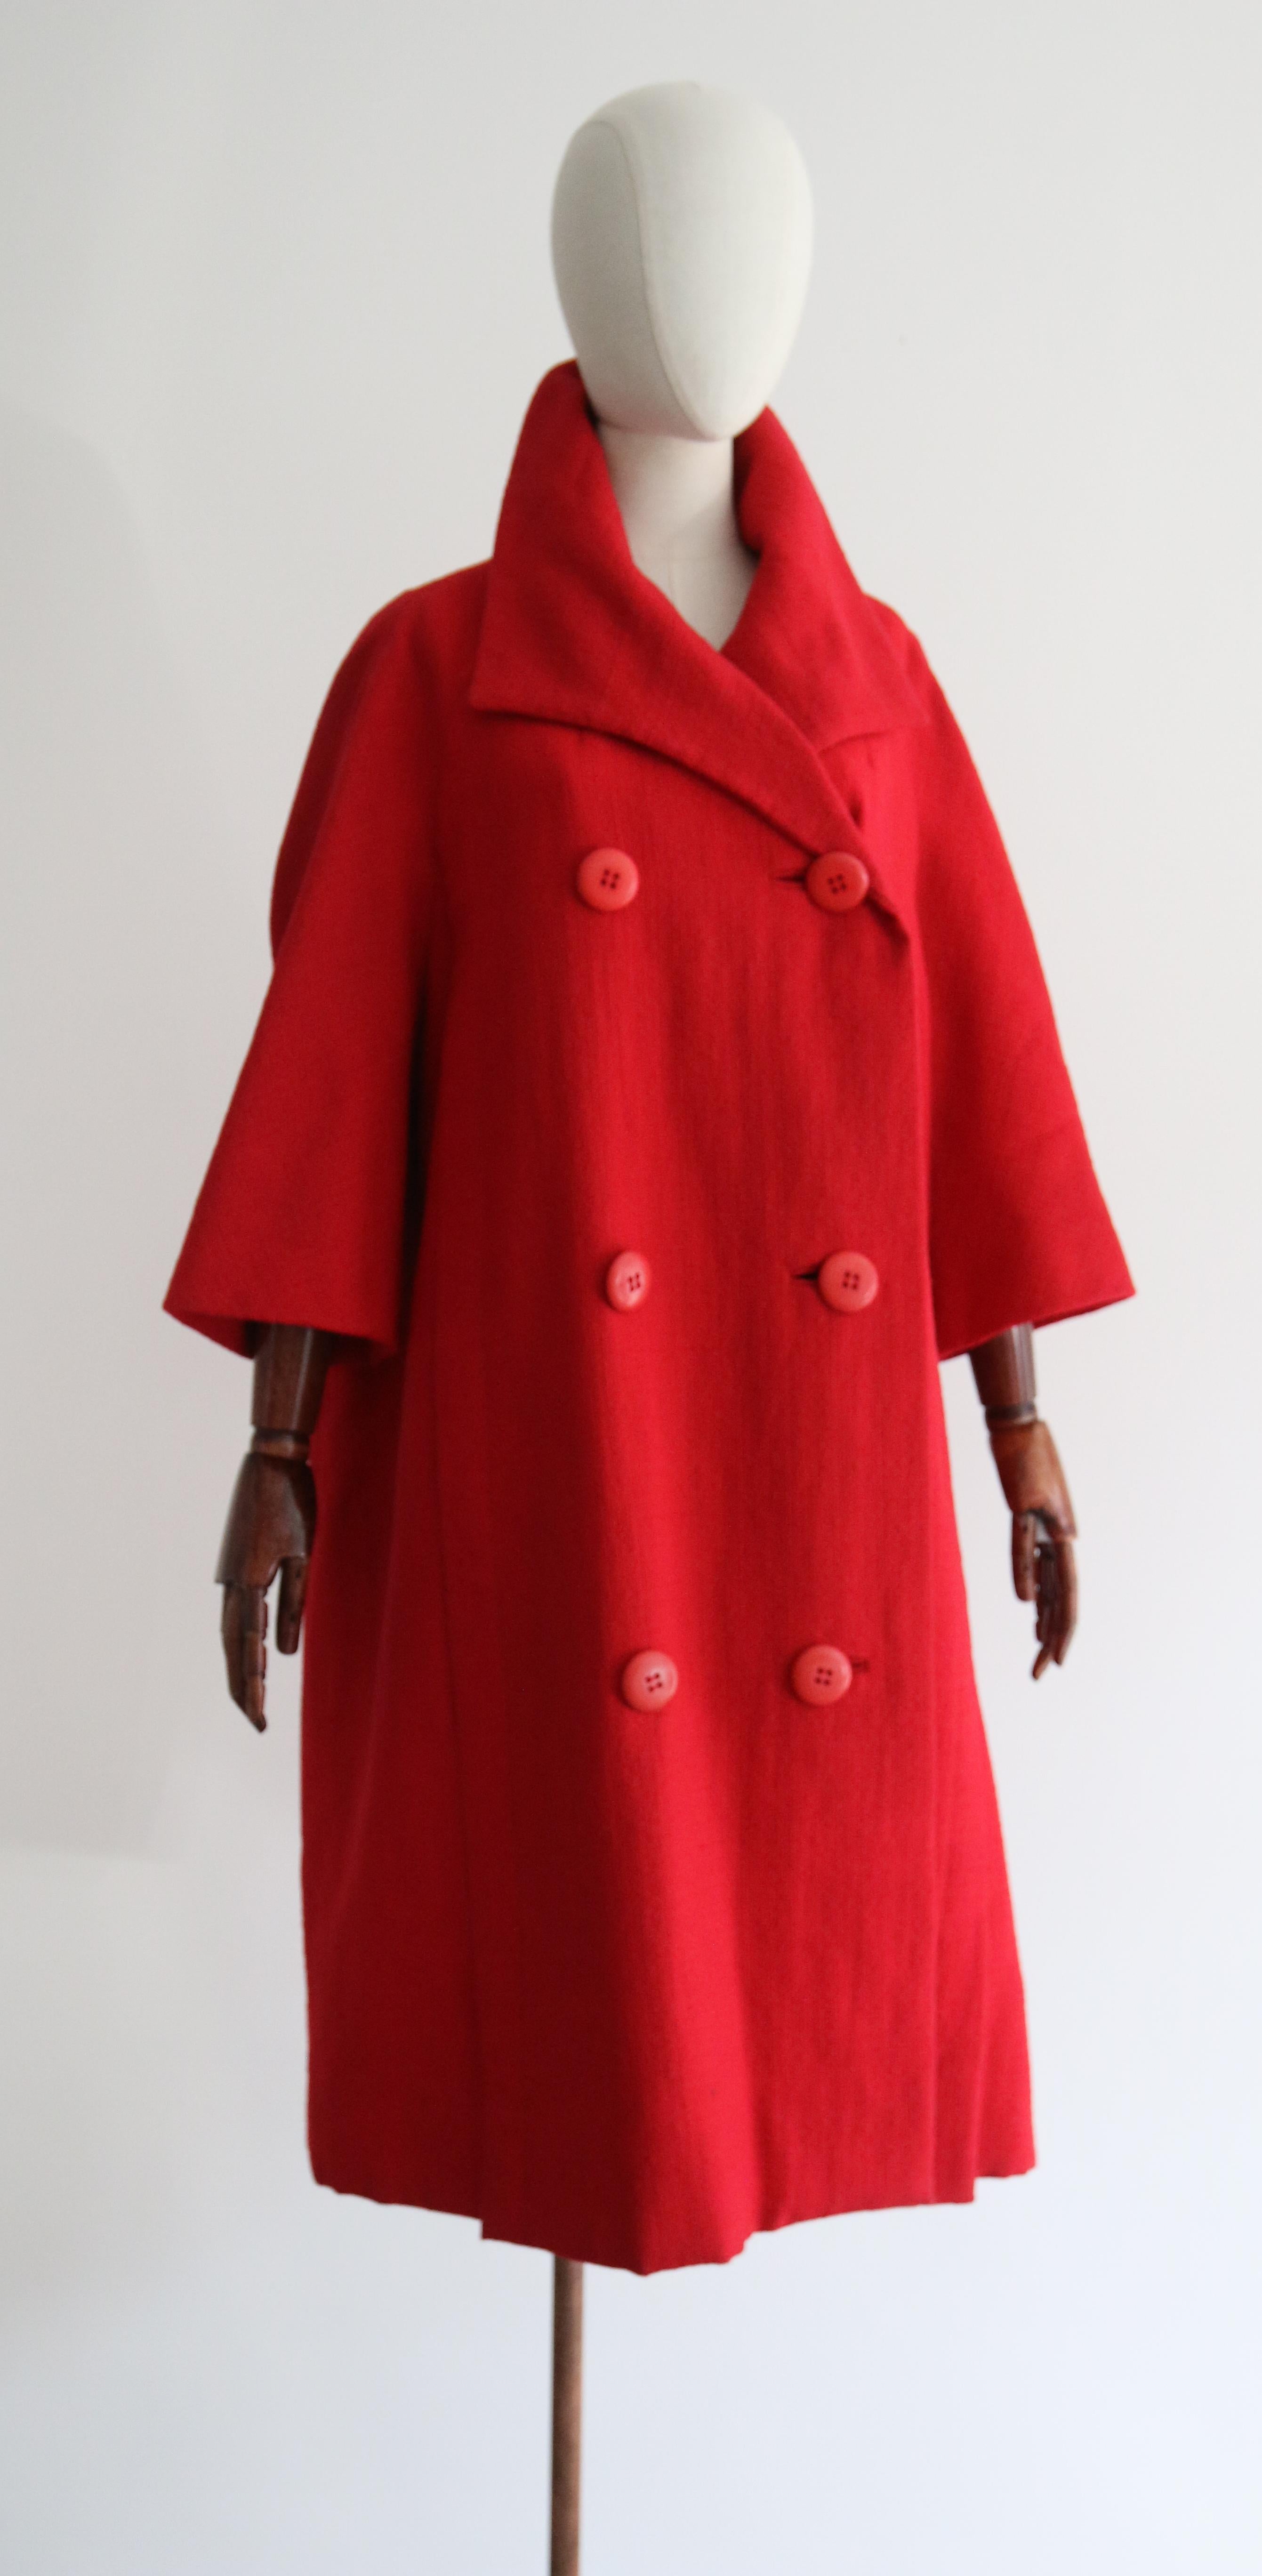 Vintage 1960's Christian Dior Wool Coat UK 14-18 US 10-14 In Fair Condition For Sale In Cheltenham, GB